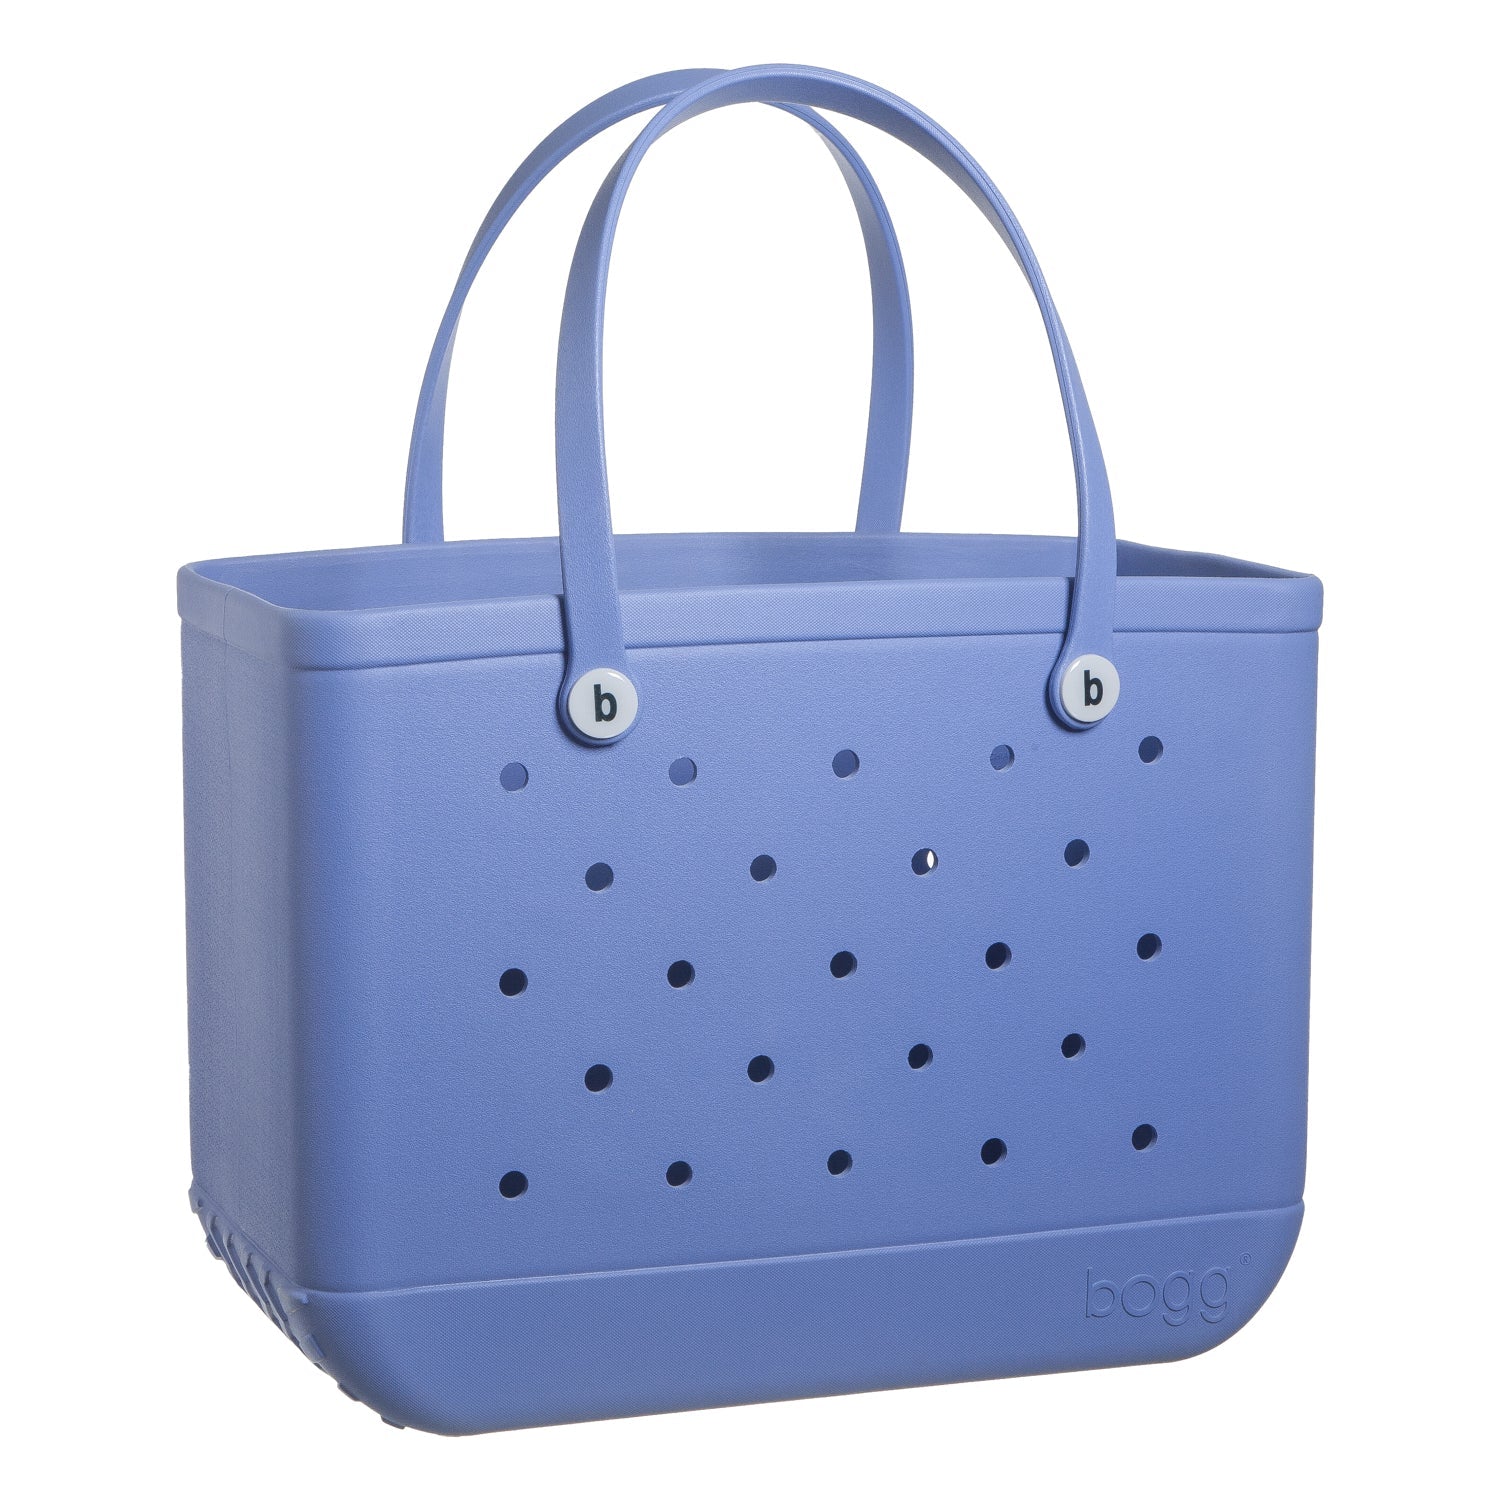 periwinkle bogg bag on a white background